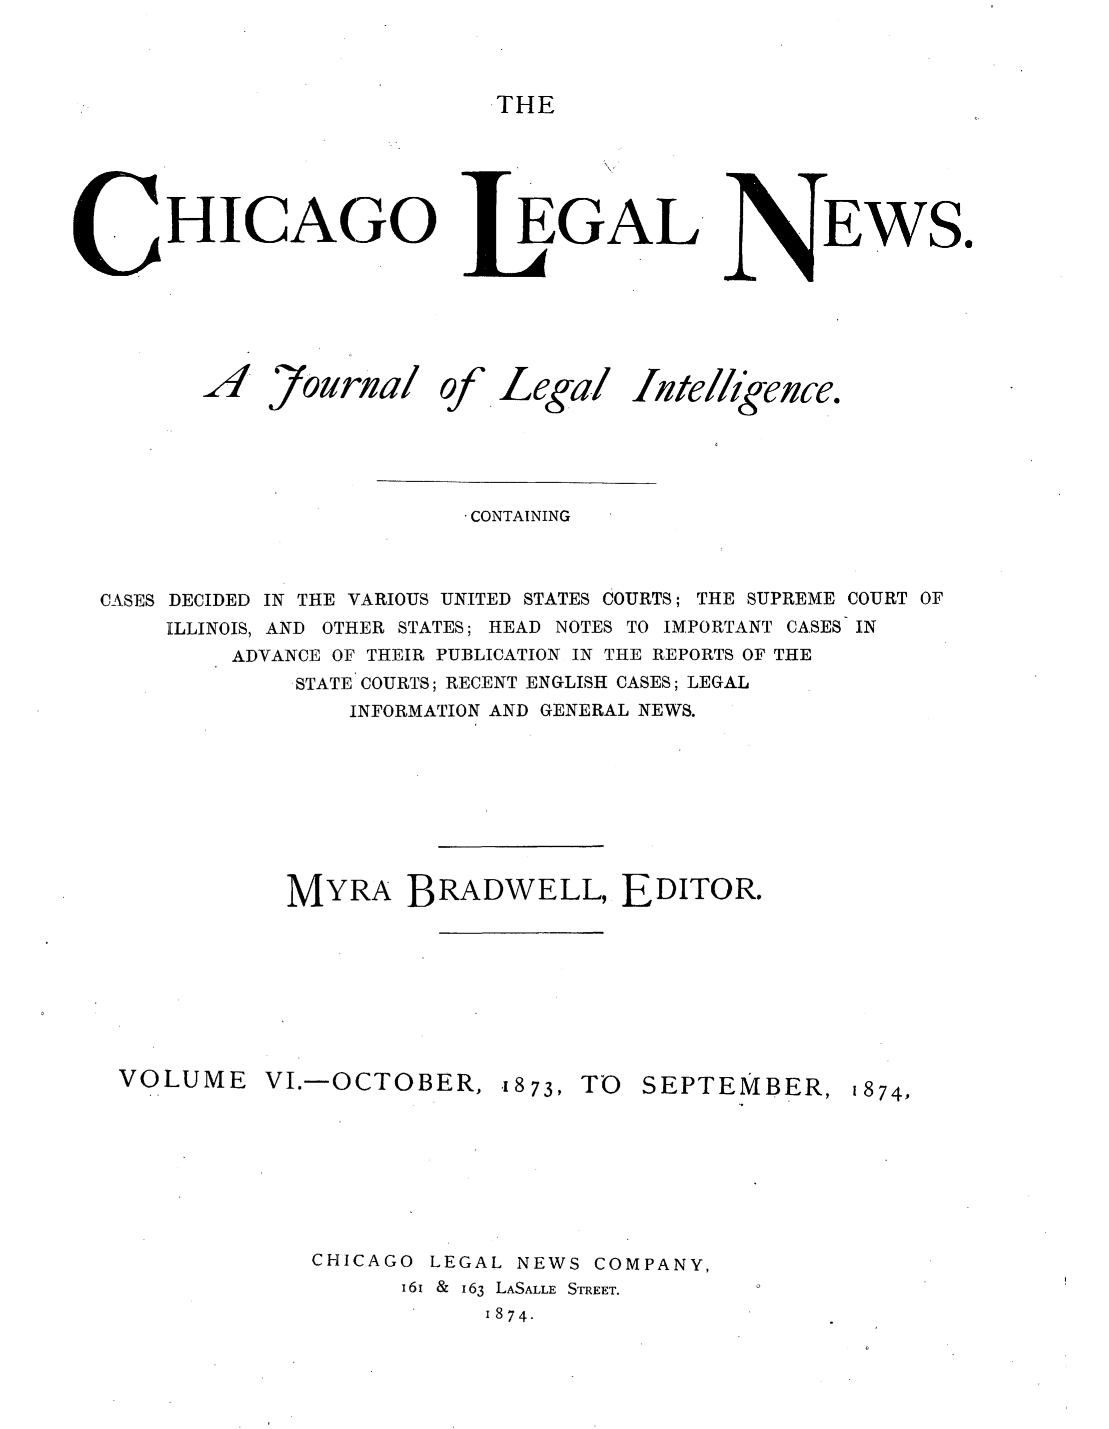 handle is hein.journals/chiclene6 and id is 1 raw text is: THEHICAGO JZ4 7ourna/ ofEGALlegalEWS.CONTAININGCASES DECIDED IN THE VARIOUS UNITED STATES COURTS; THE SUPREME COURT OFILLINOIS, AND OTHER STATES; HEAD NOTES TO IMPORTANT CASES INADVANCE OF THEIR PUBLICATION IN THE REPORTS OF THESTATE COURTS; RECENT ENGLISH CASES; LEGALINFORMATION AND GENERAL NEWS.MYRA BRADWELL, EDITOR.VOLUMEVI.-OCTOBER, .1873, TOSEPTEMBER, 1874,CHICAGO LEGAL NEWS COMPANY,16i & 163 LASALLE STREET.1874.Itlellknce.